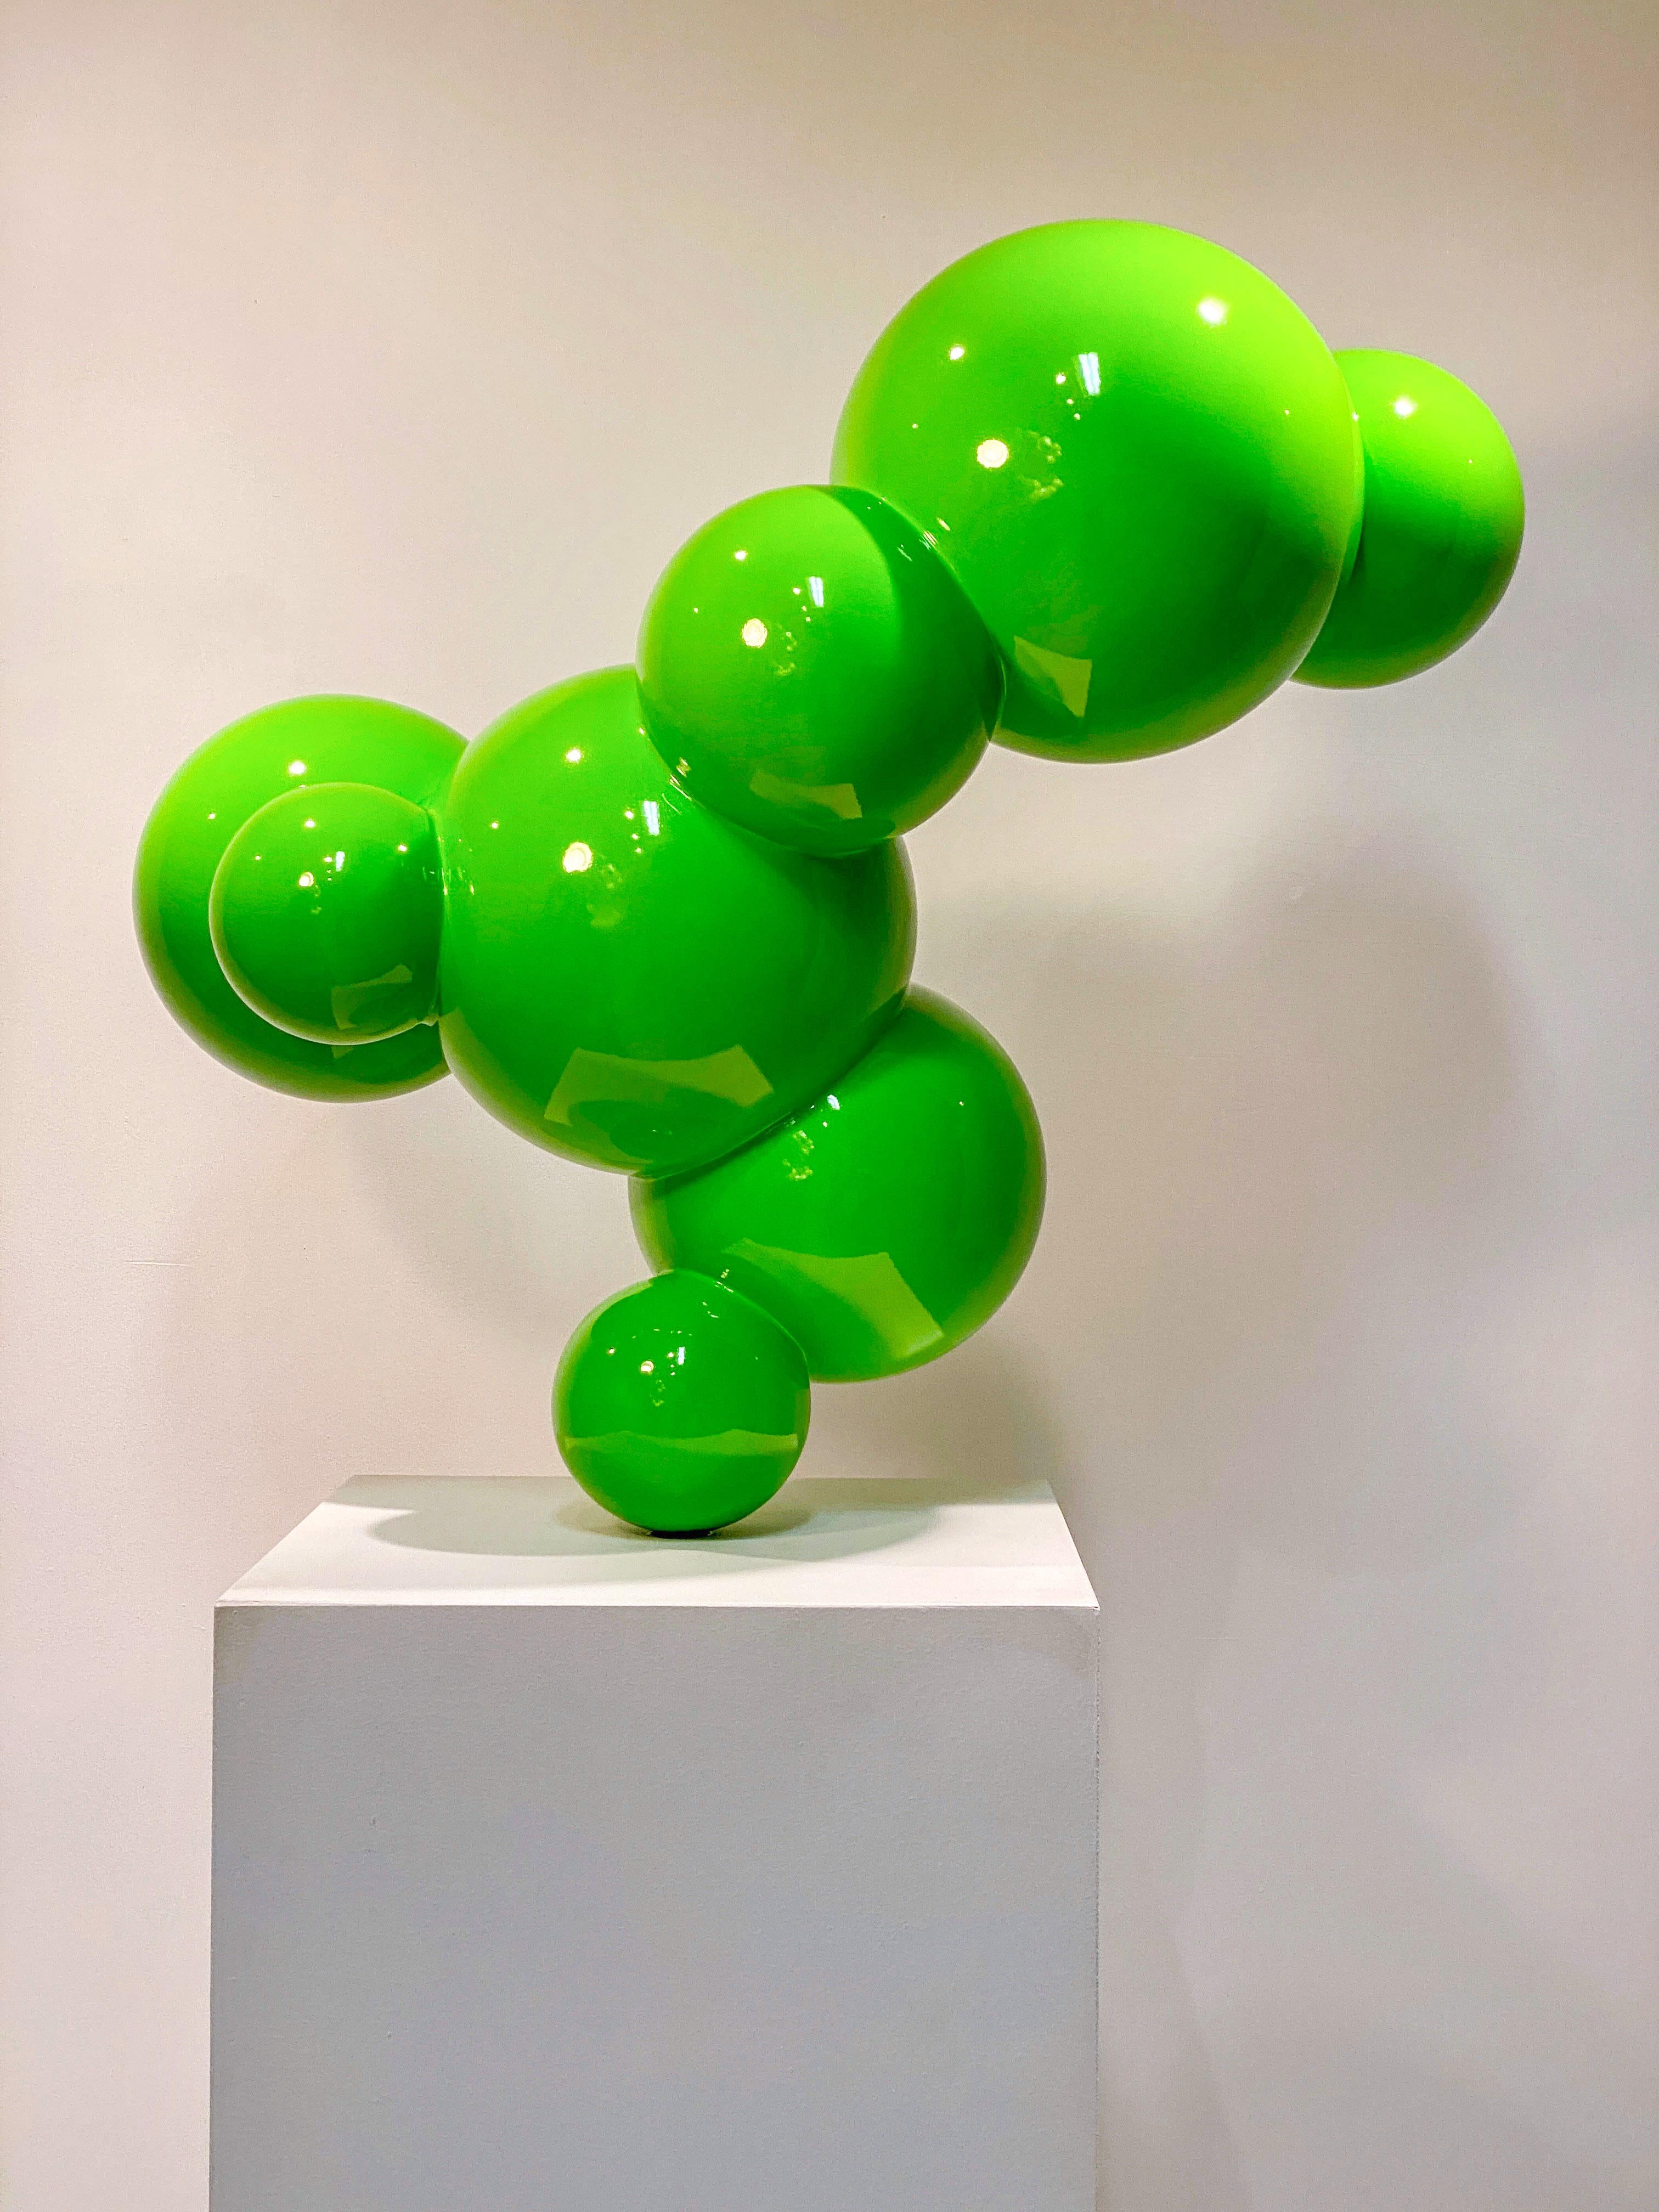 Algae 3 - green, polished, geometric abstract, painted stainless steel sculpture - Sculpture by Alexander Caldwell